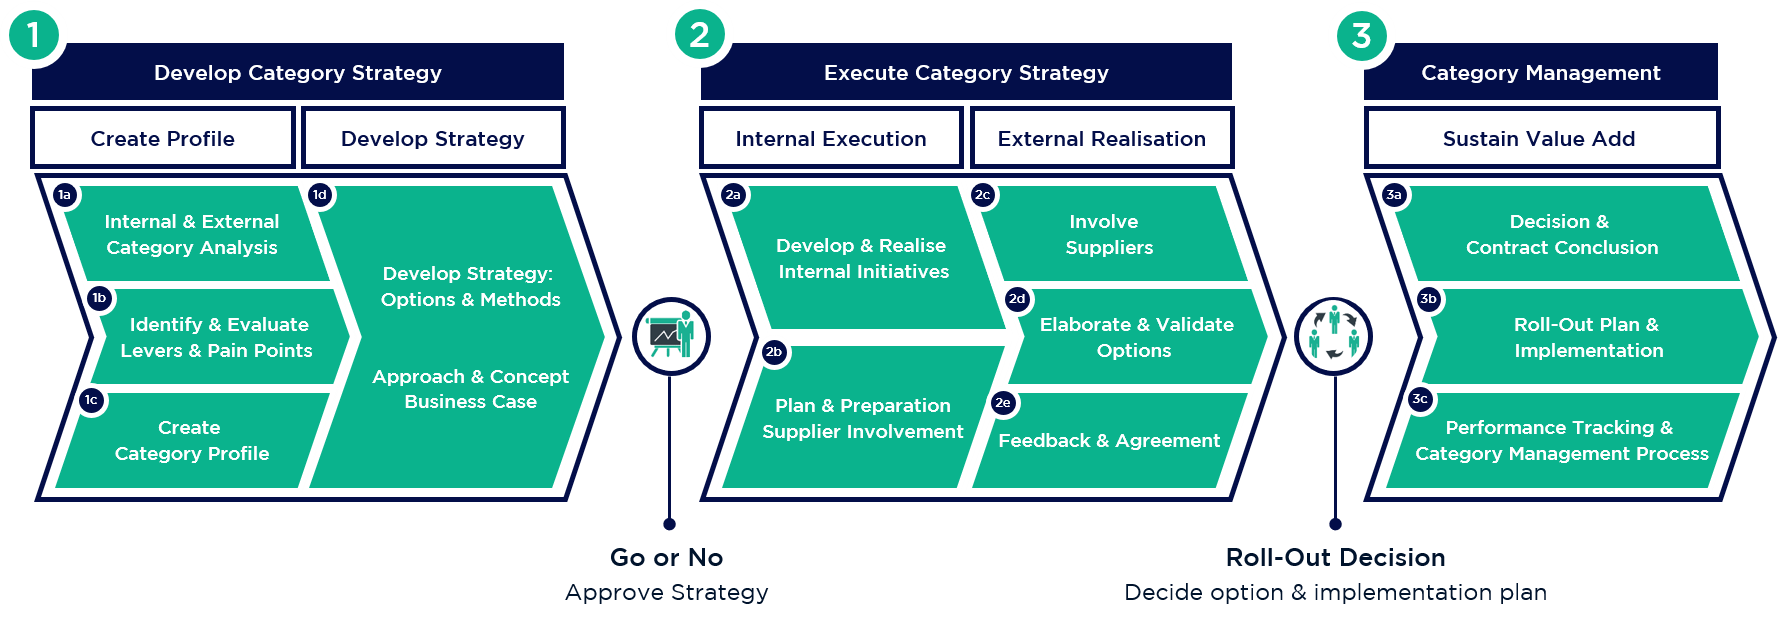 Process Category Strategy & Category Management